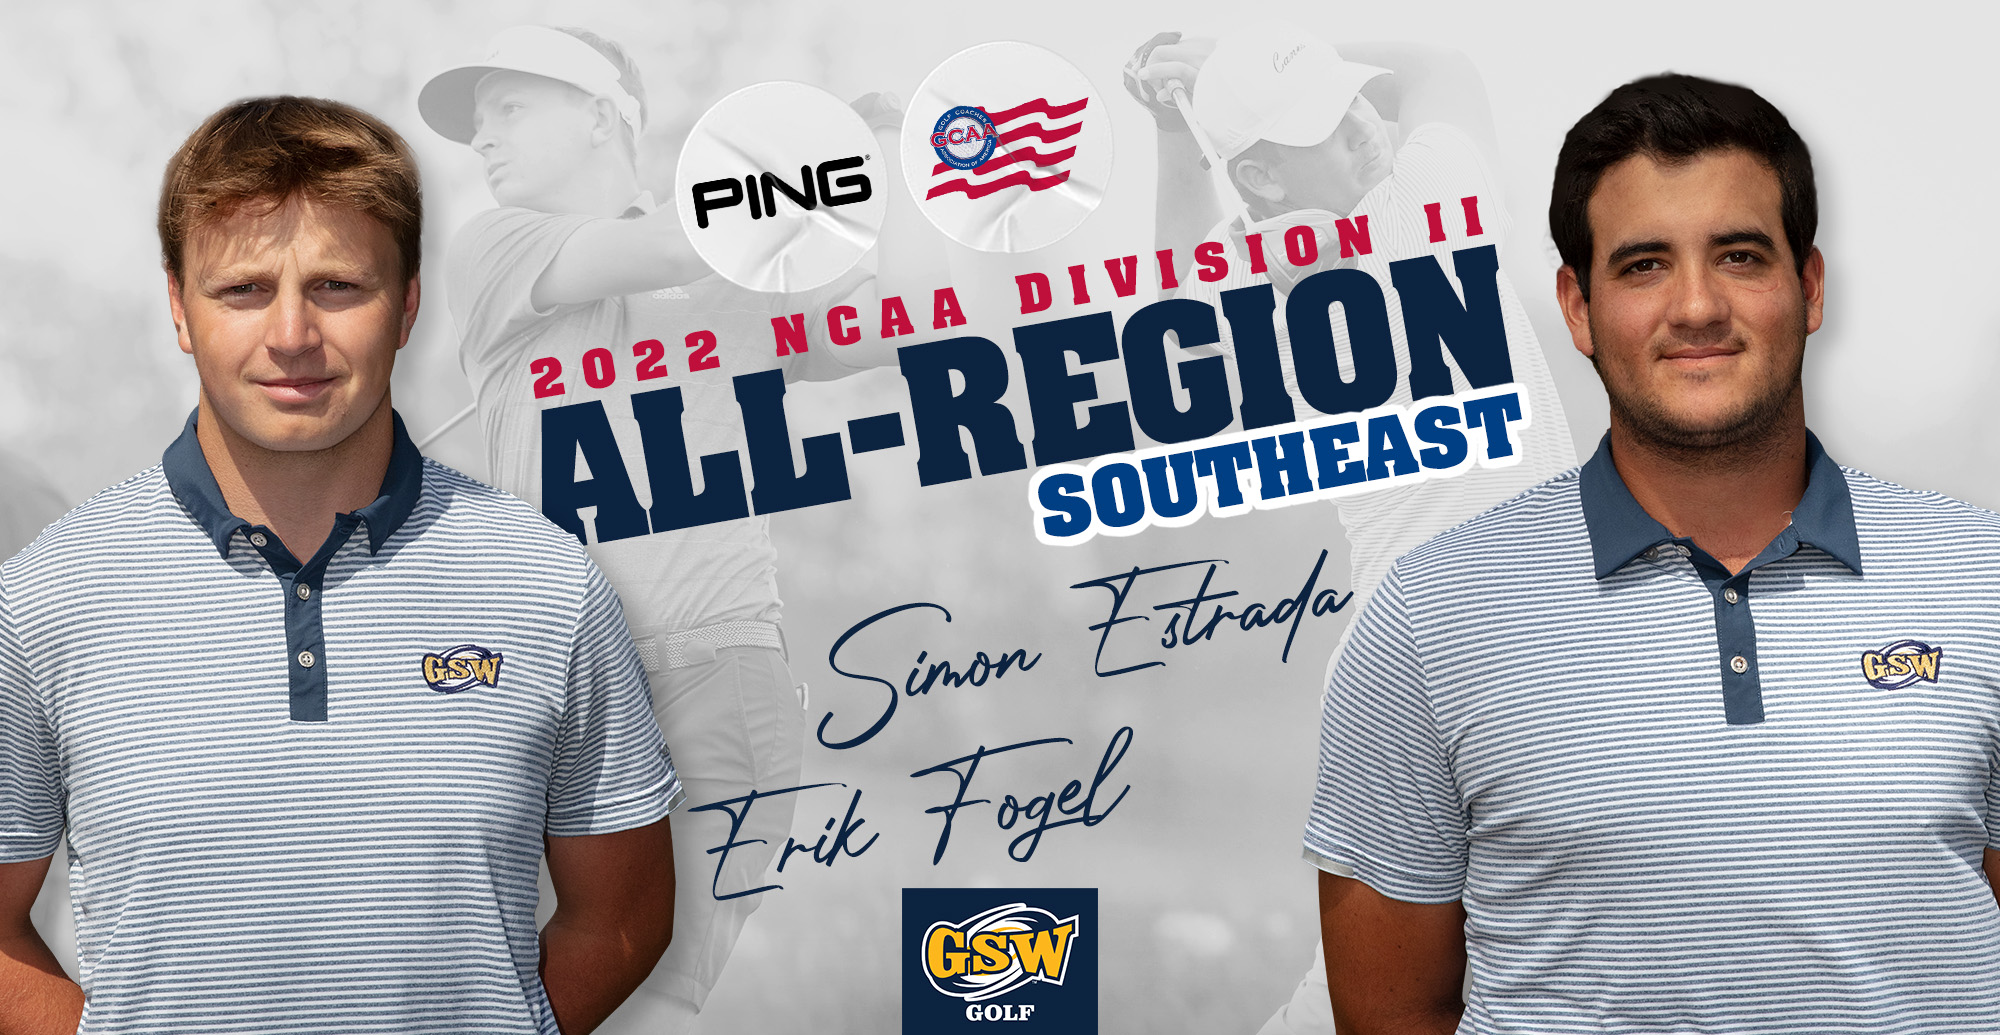 Estrada and Fogel Named to PING All-Region Team